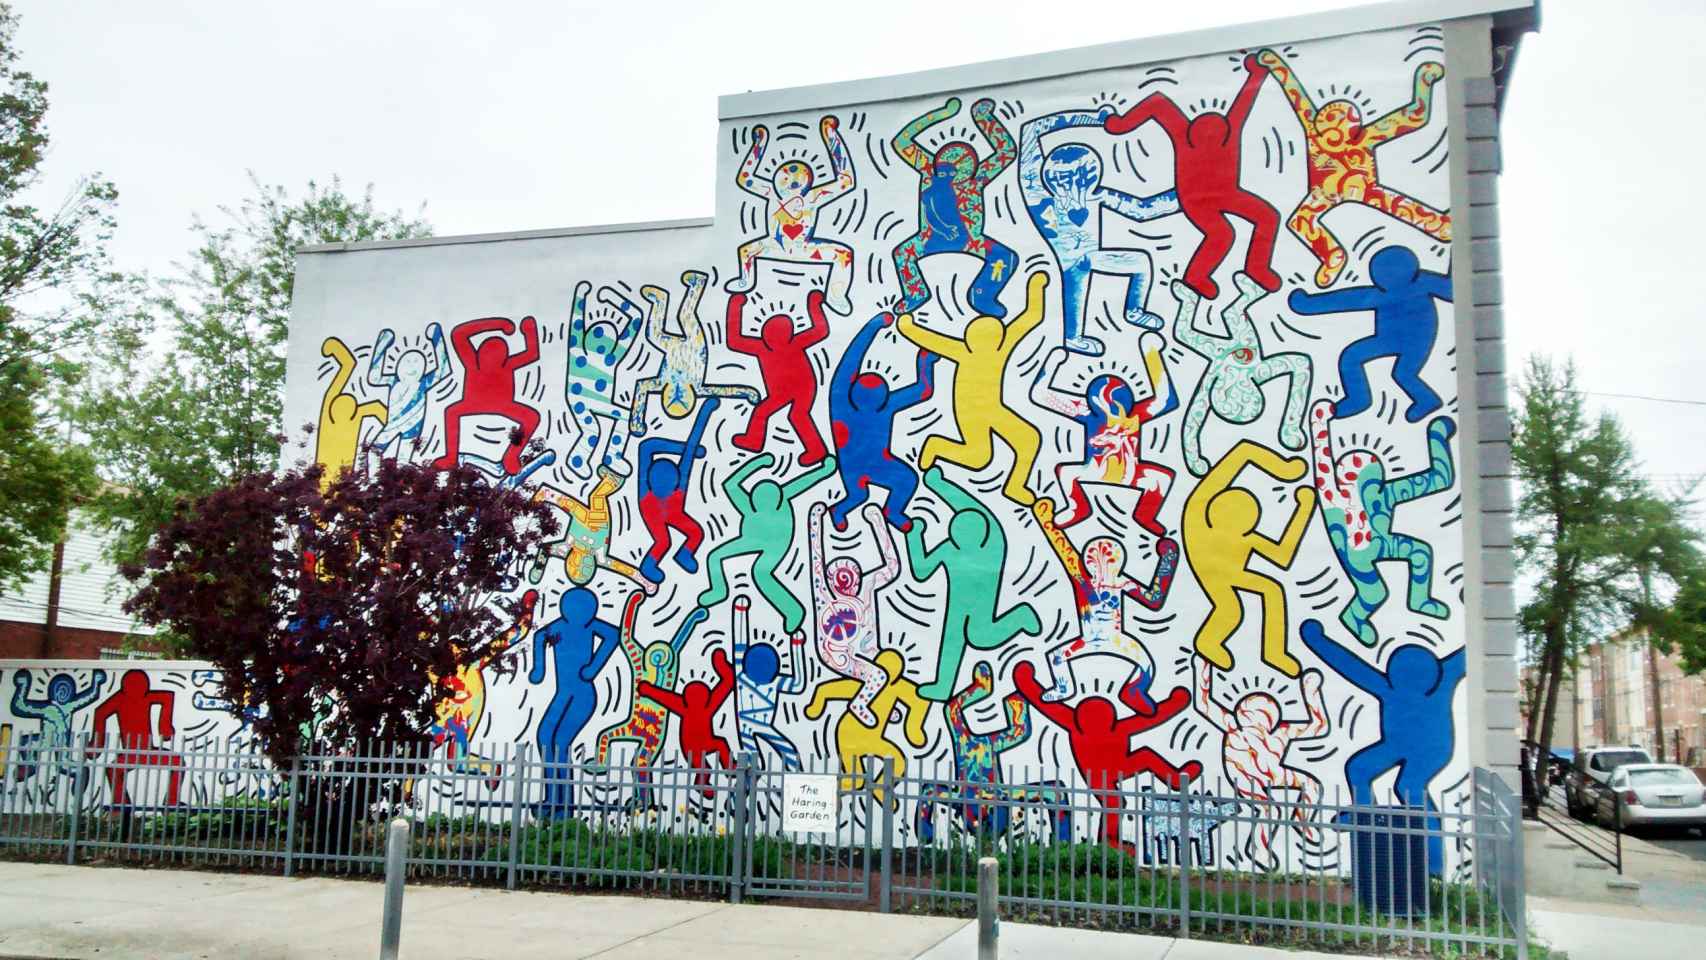 Keith Haring We Are The Youth.